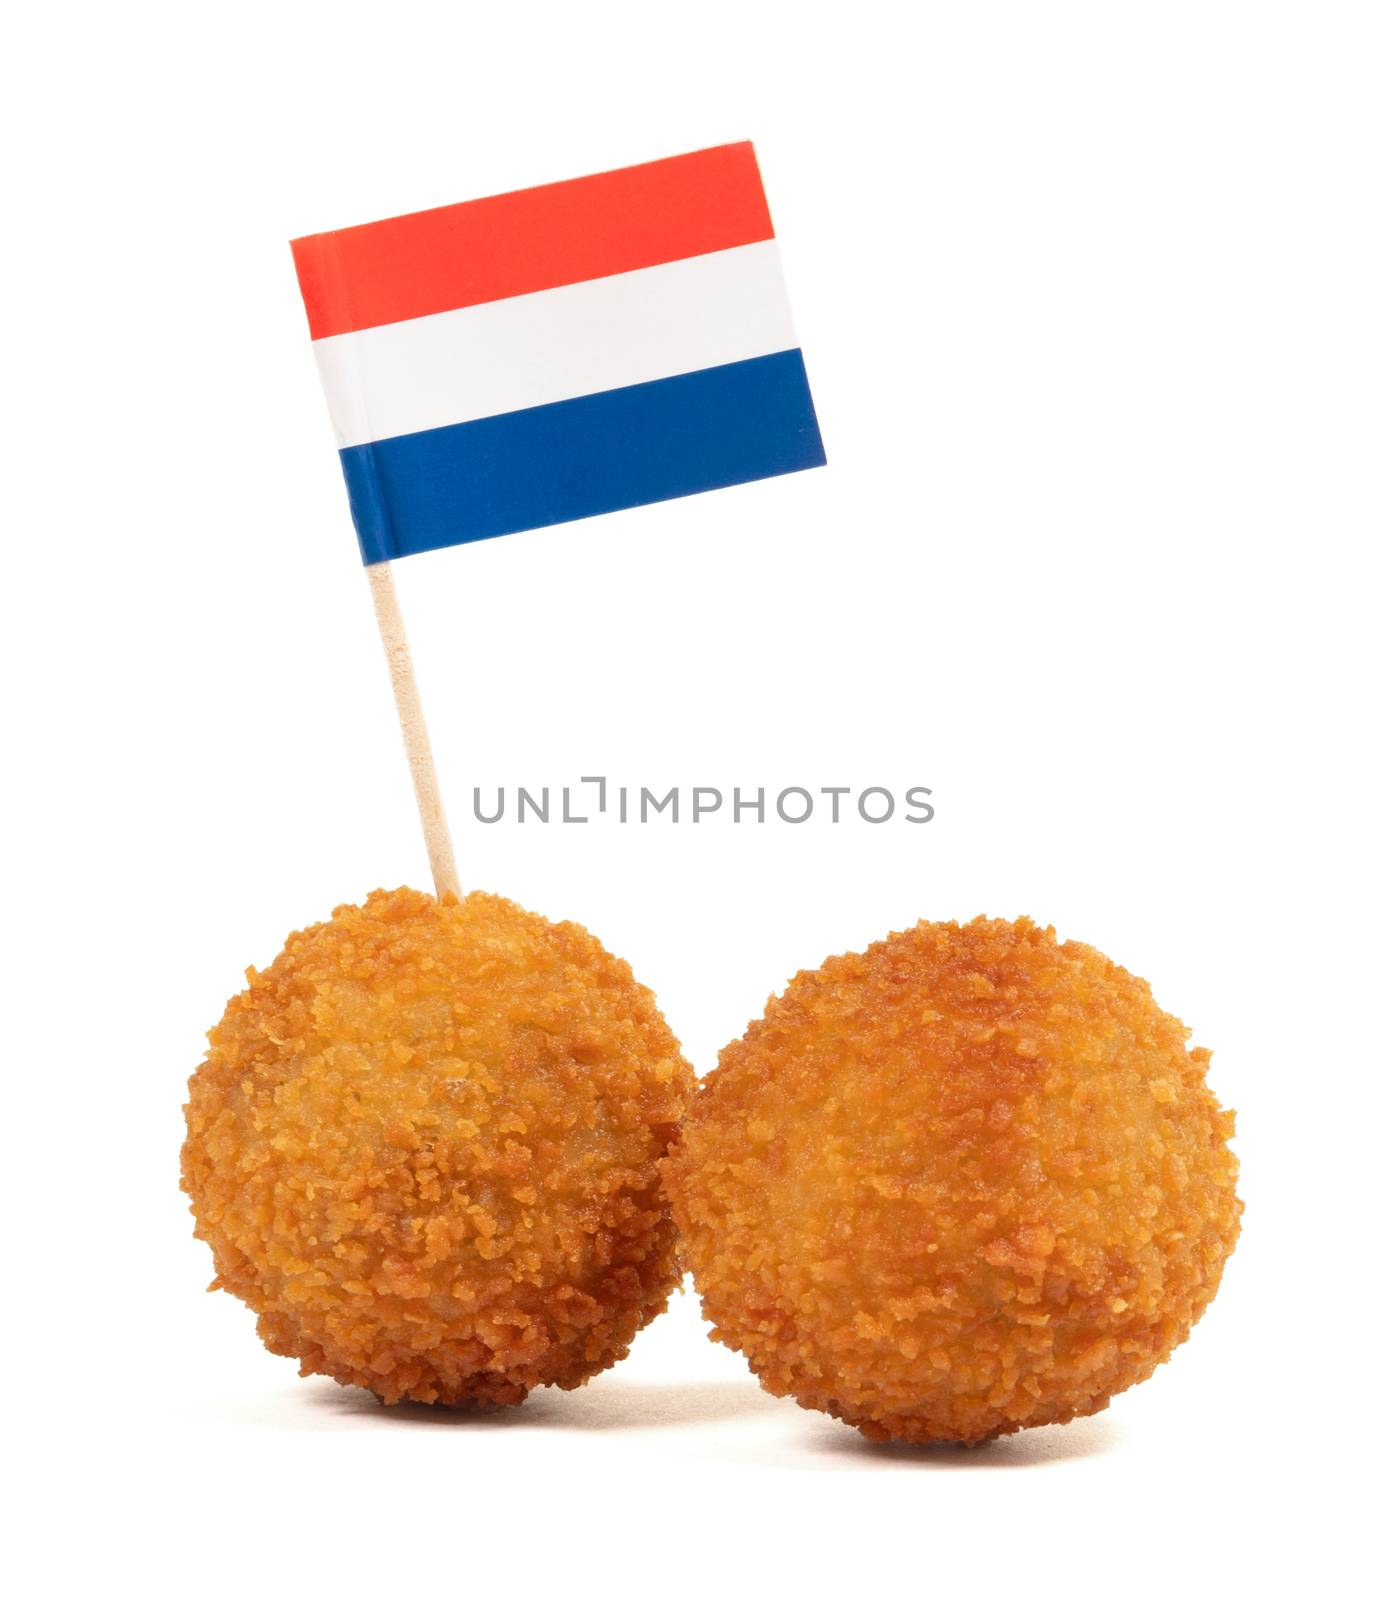 Dutch traditional snack bitterbal with a dutch flag by michaklootwijk